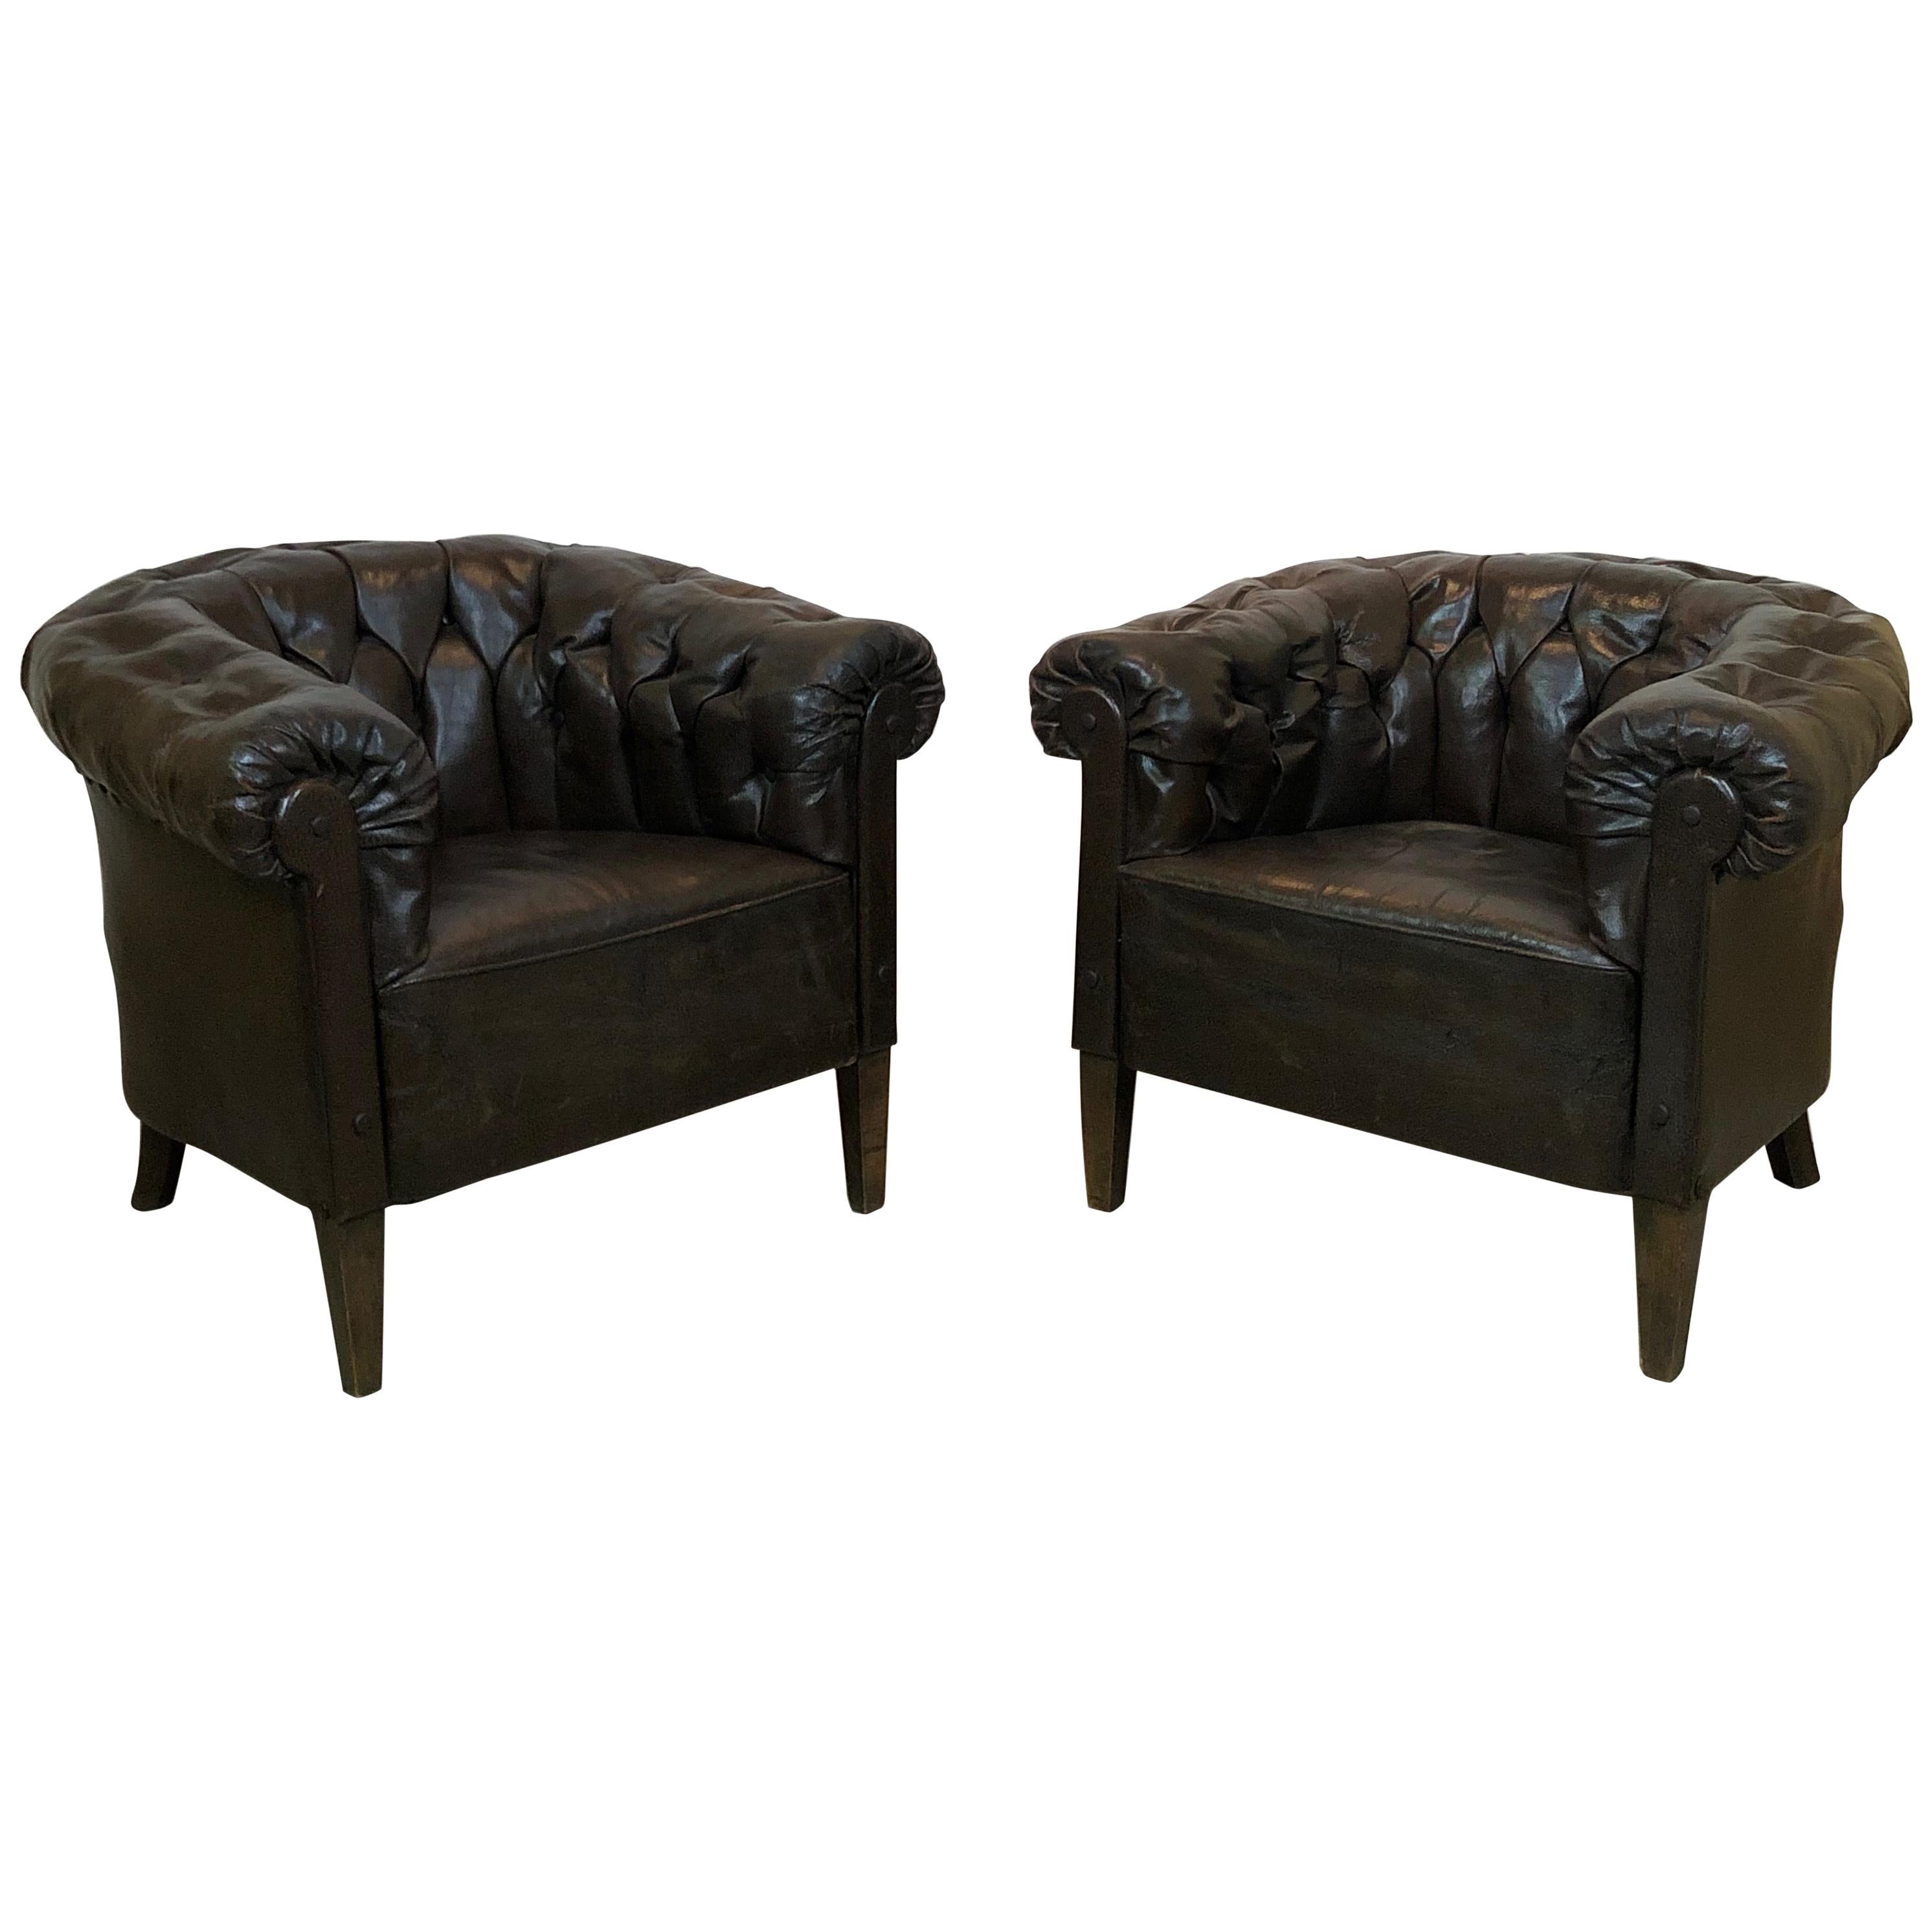 20th Century Pair of Chesterfield Cockpit Chairs For Sale